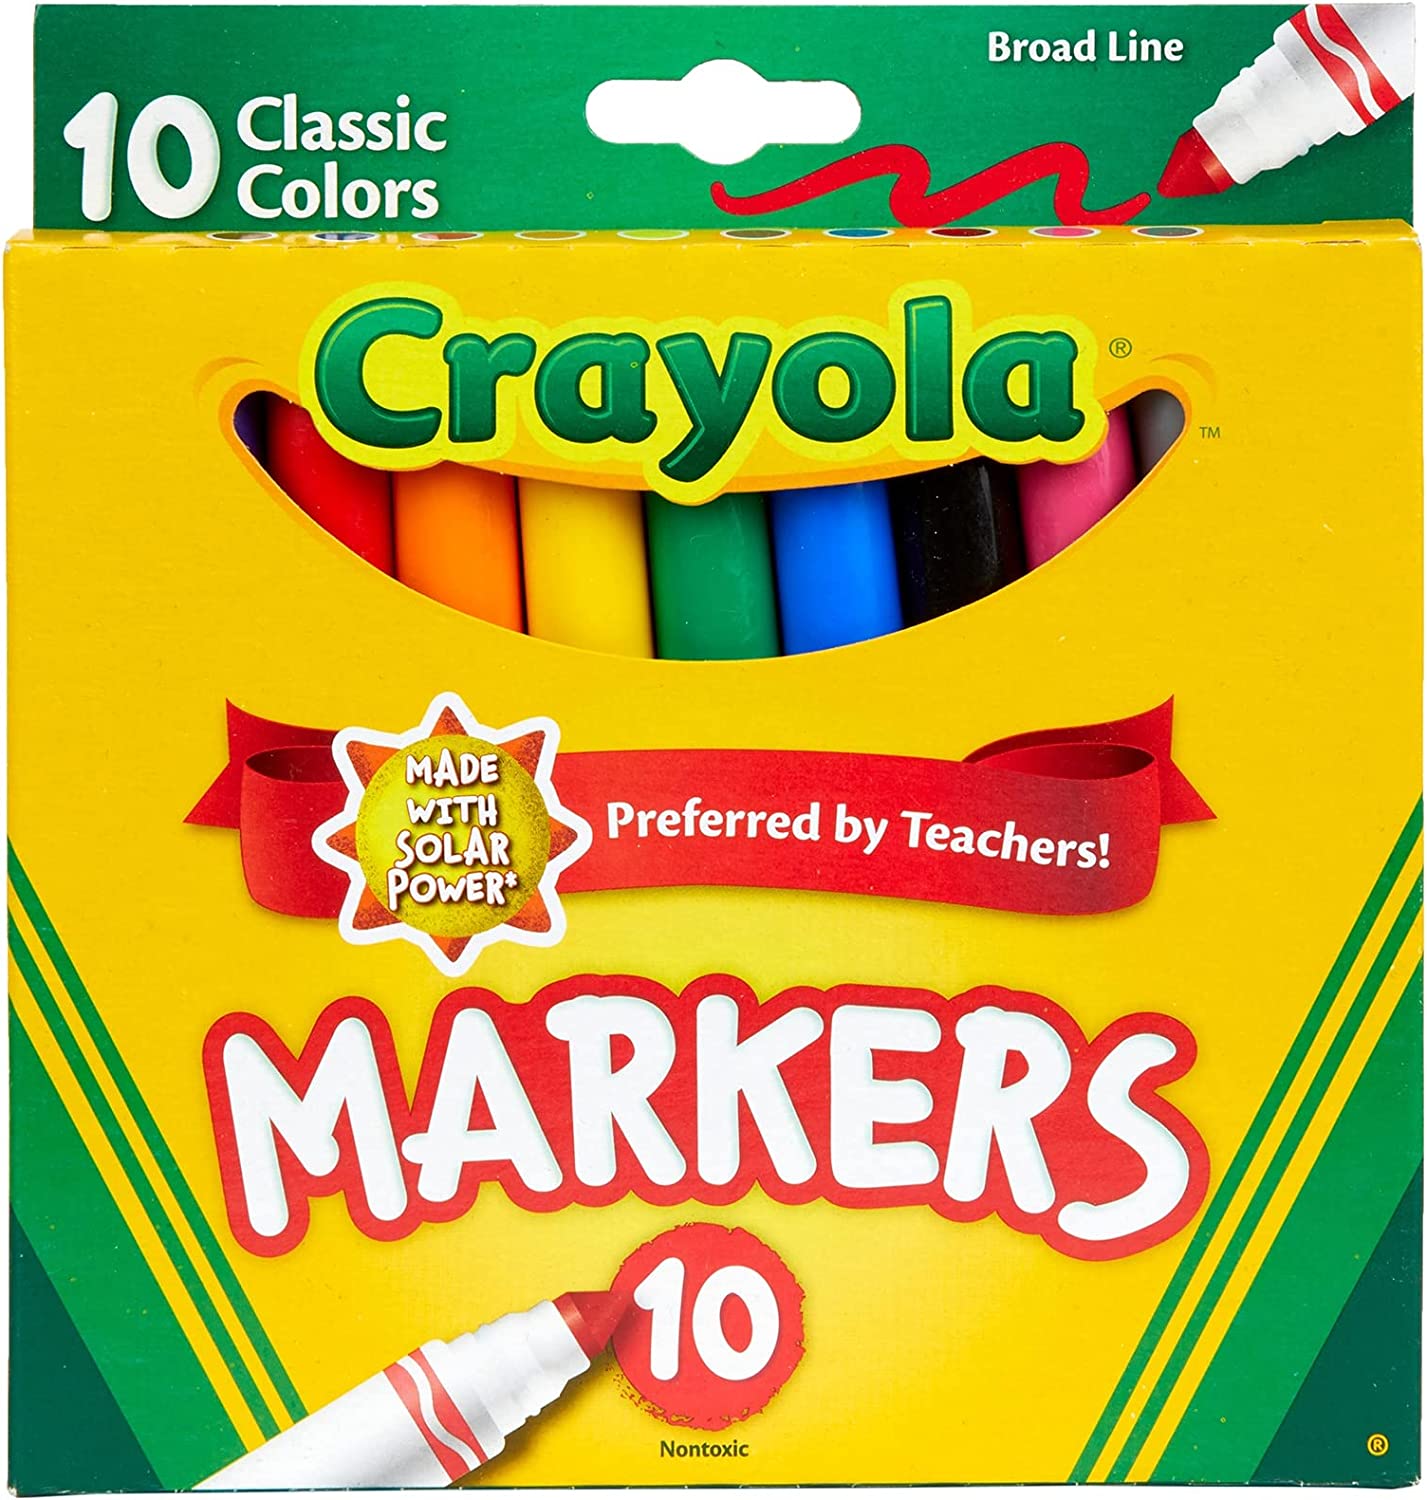 10-Count Crayola Broad Line Markers (Classic Colors) $0.97 + Free Shipping w/ Prime or on orders over $25